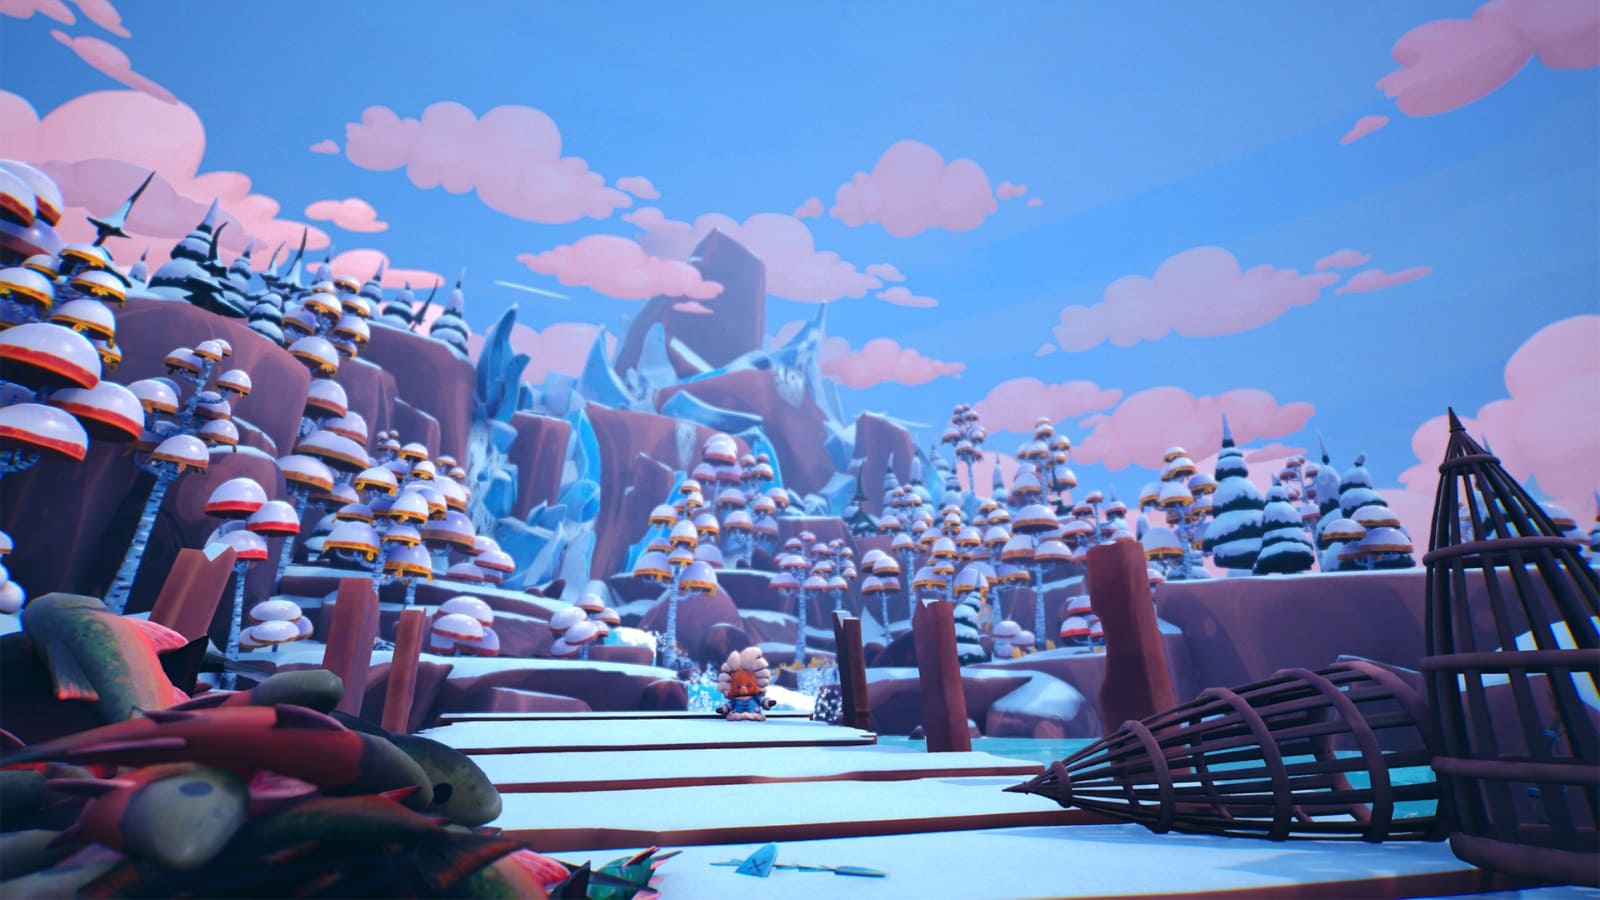 A panoramic view of a frozen forest with mushrooom-looking trees and a small character at the end of a bridge on top of a lake